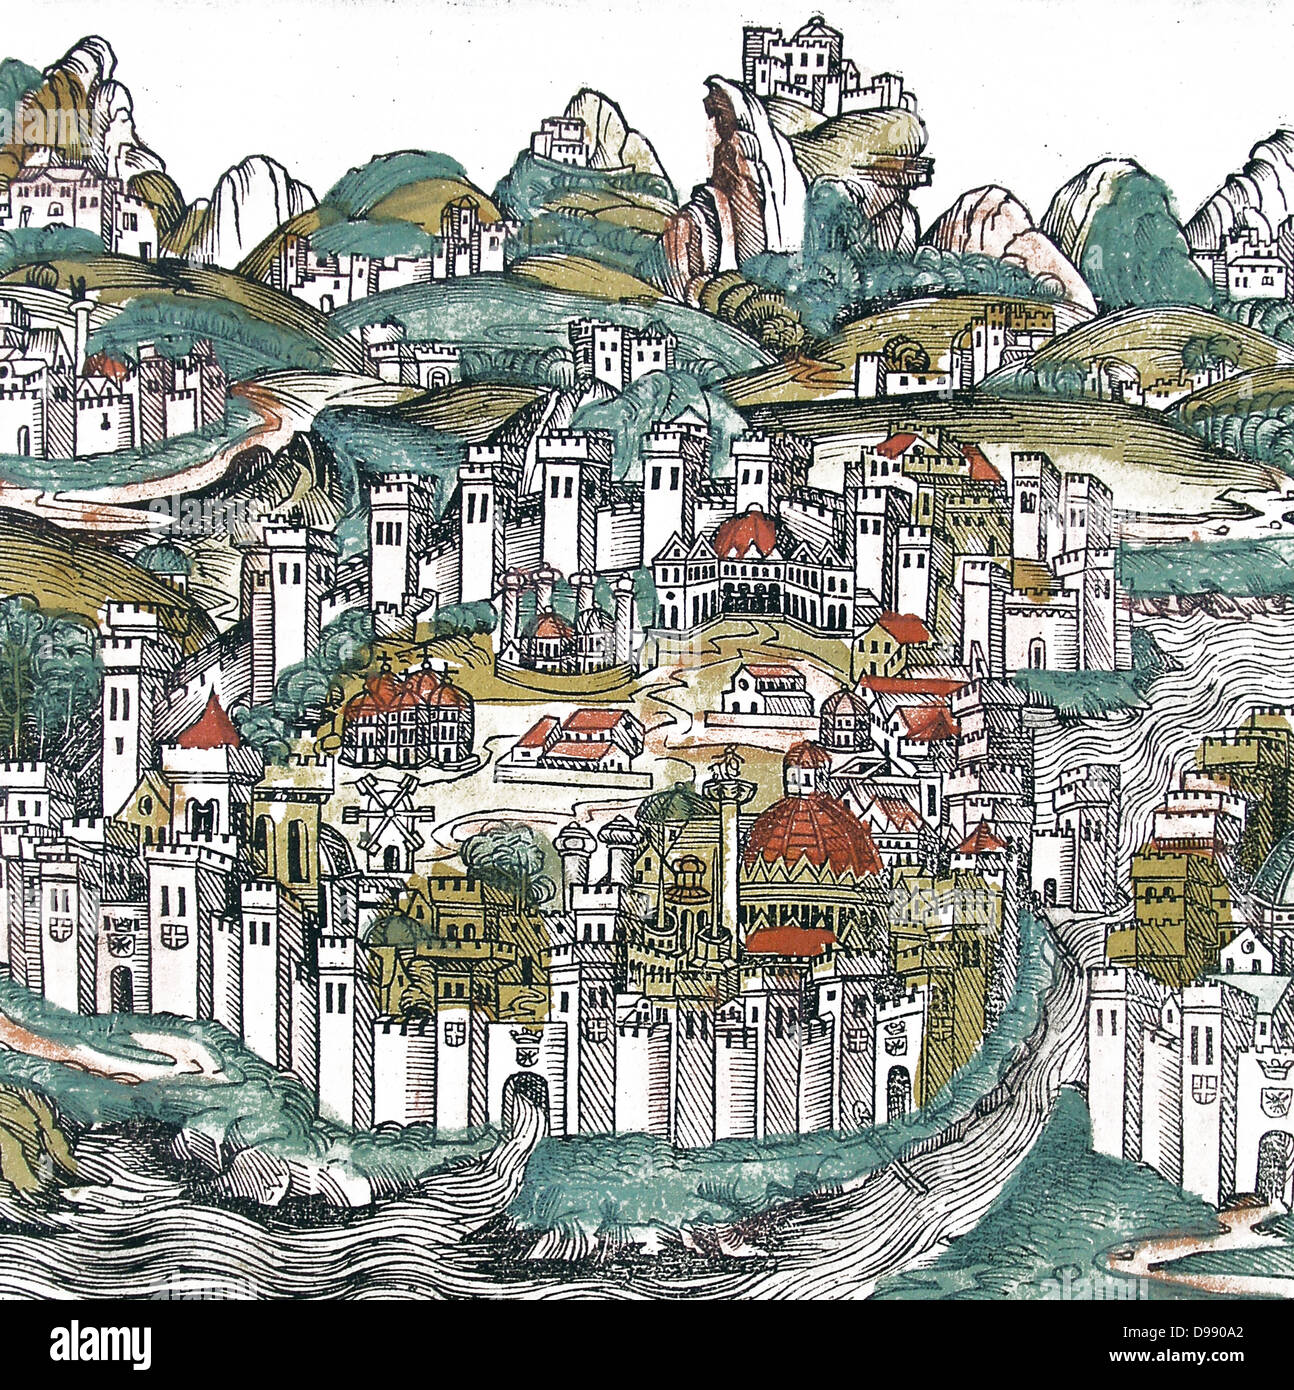 Constantinople from the nuremberg Chronicle. The Nuremberg Chronicle is an illustrated Biblical paraphrase and world history that follows the story of human history related in the Bible; it includes the histories of a number of important Western cities. Written in Latin by Hartmann Schedel, with a version in German translation by Georg Alt, it appeared in 1493. Stock Photo